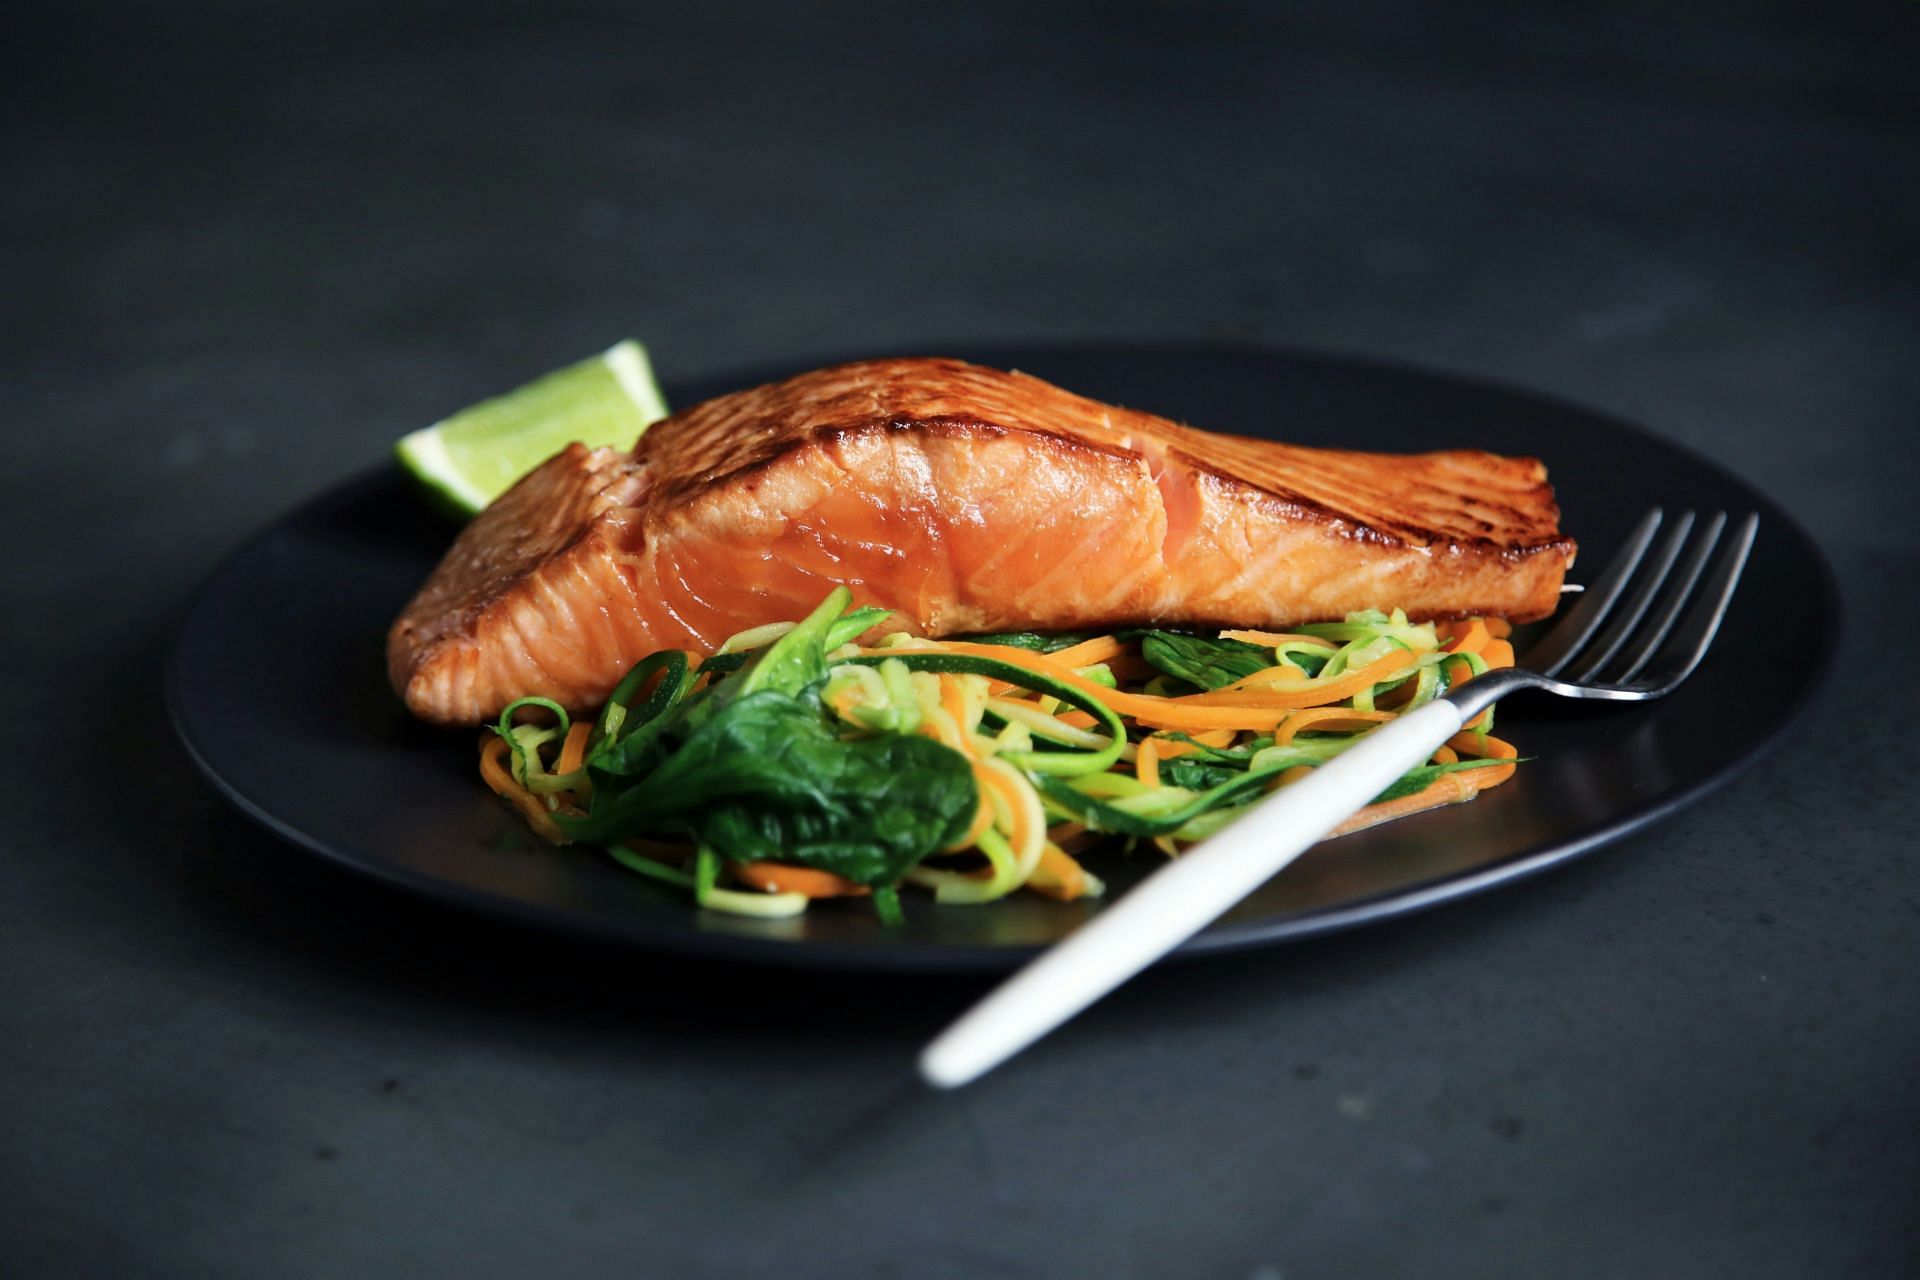 Salmon with some veggies can be a great meal for lunch (Image by CA Creative/Unsplash)